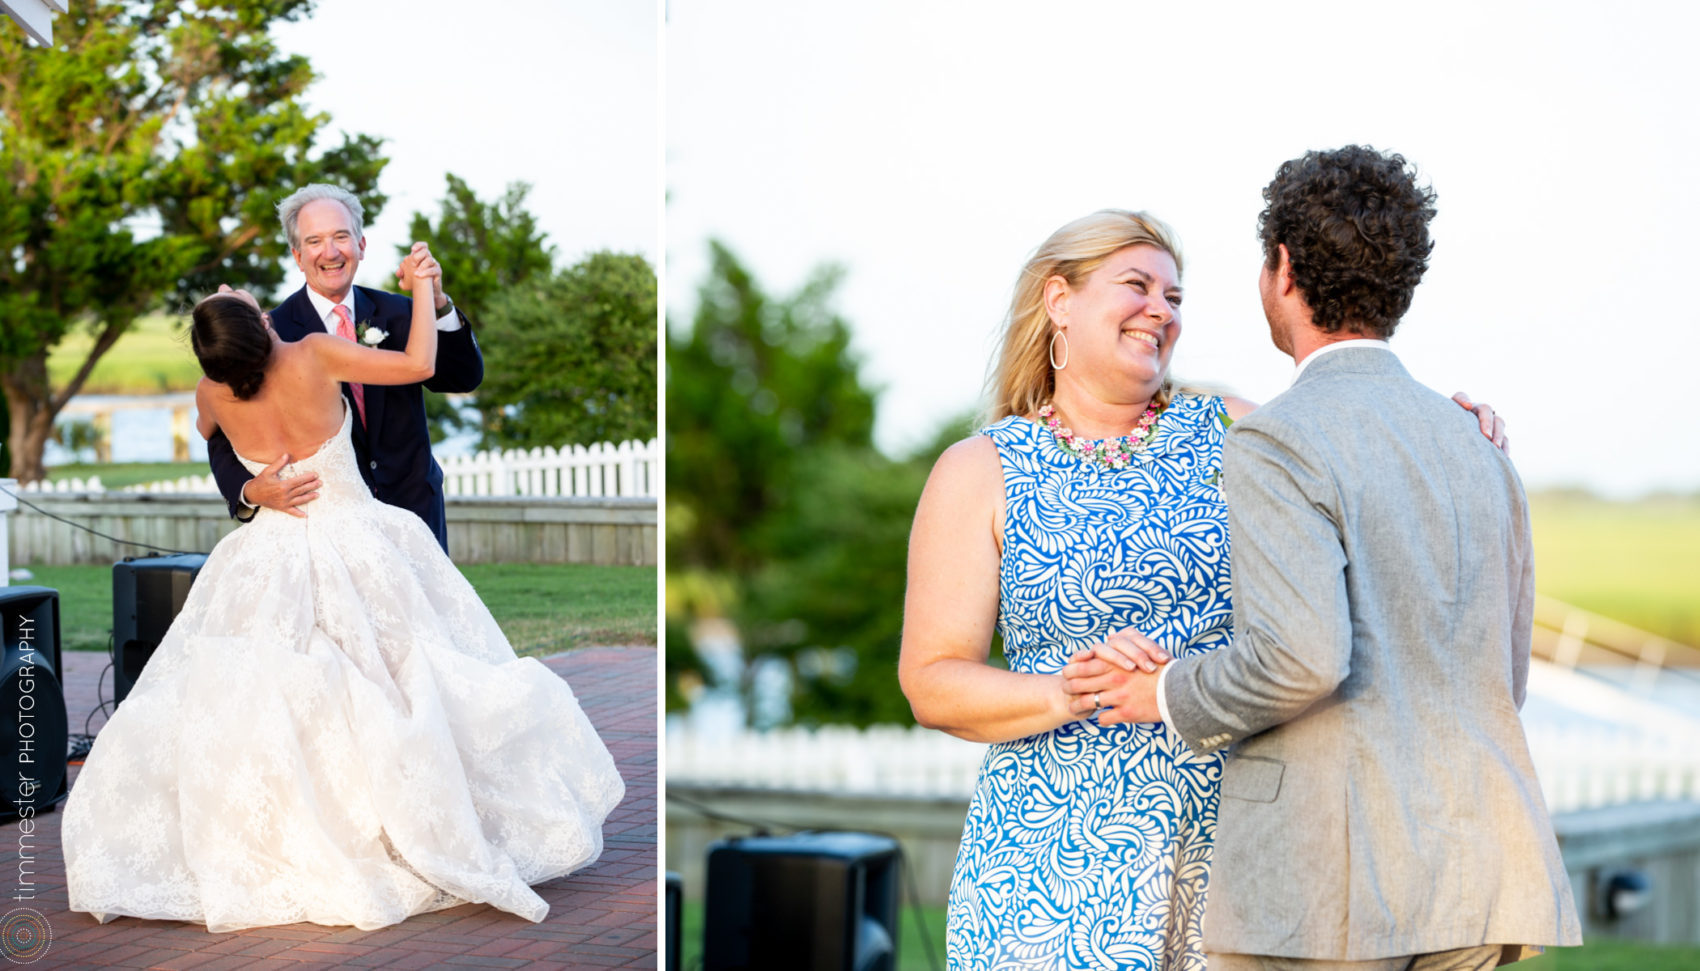 A Bald Head Island wedding with a beach ceremony and outdoor reception